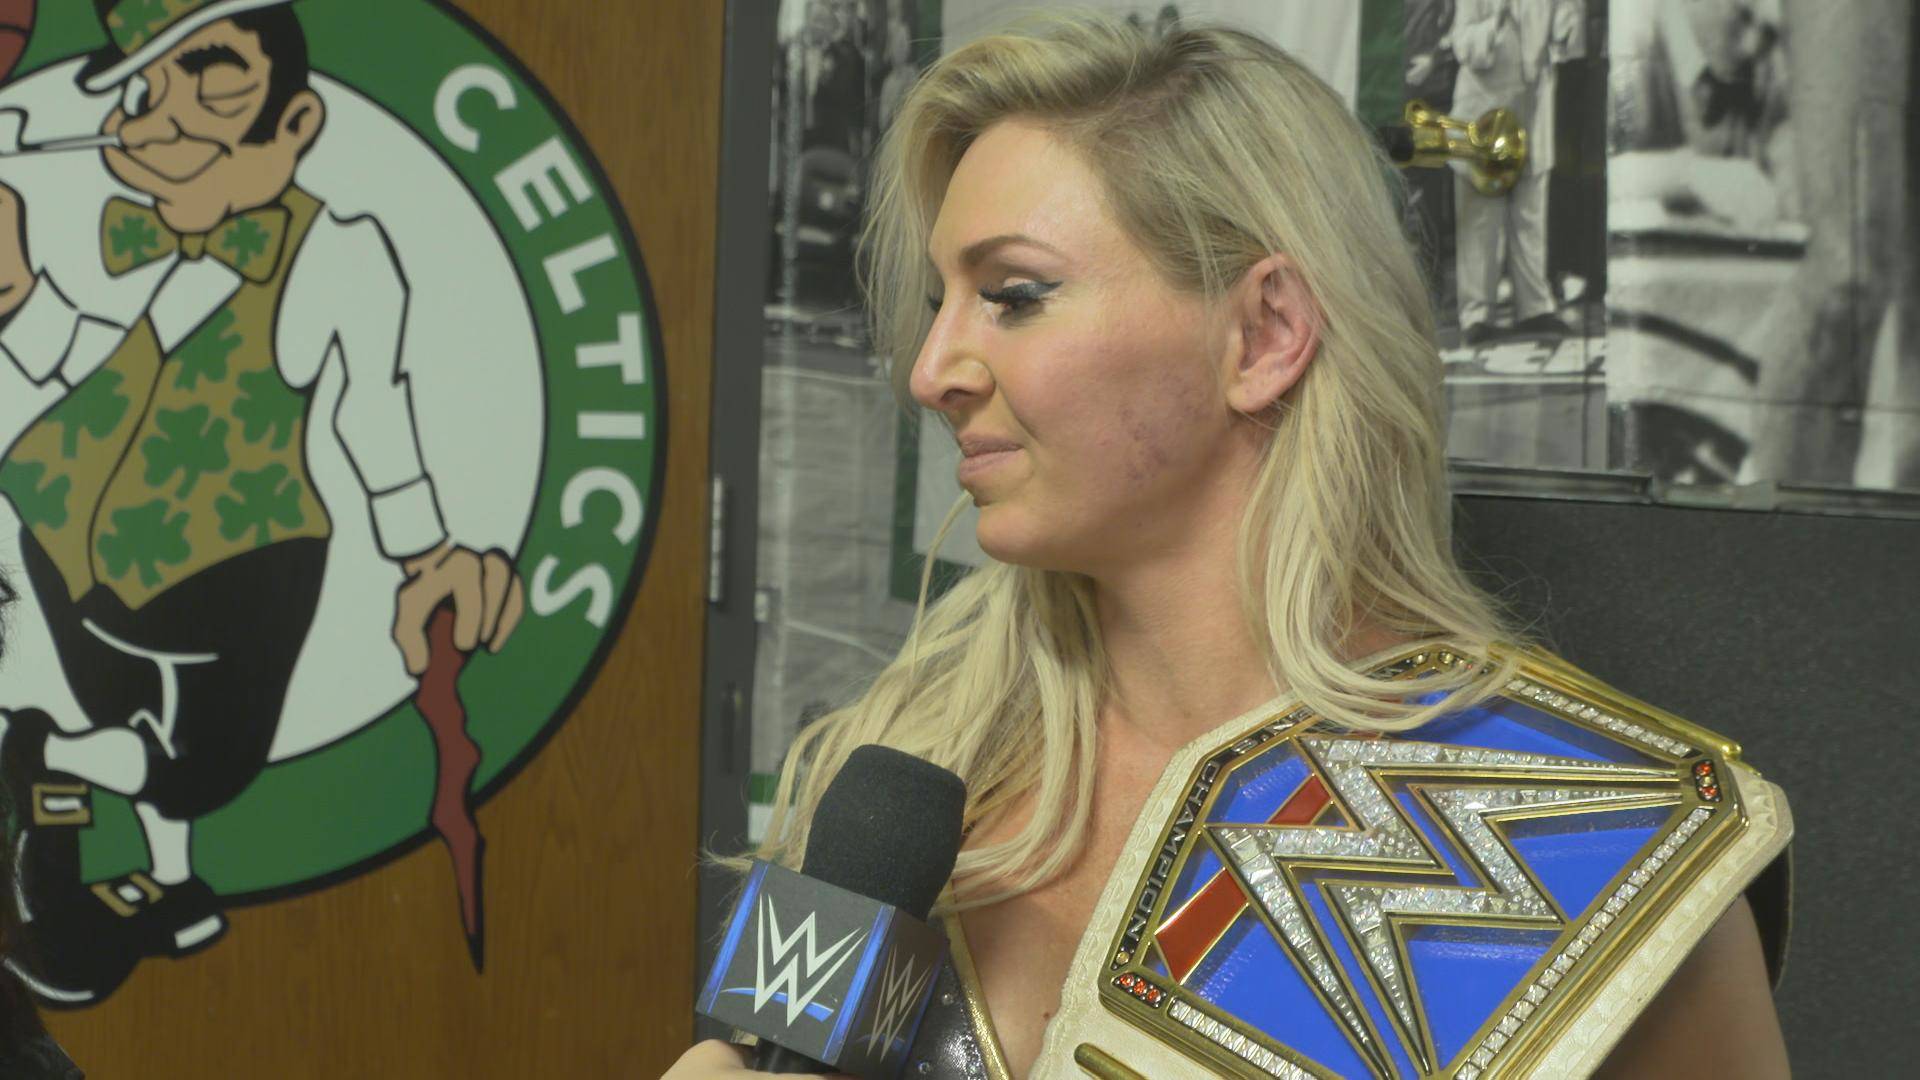 Charlotte reacts to Natalya's attack on her family name: WWE.com Exclusive, Dec. 17, 2017